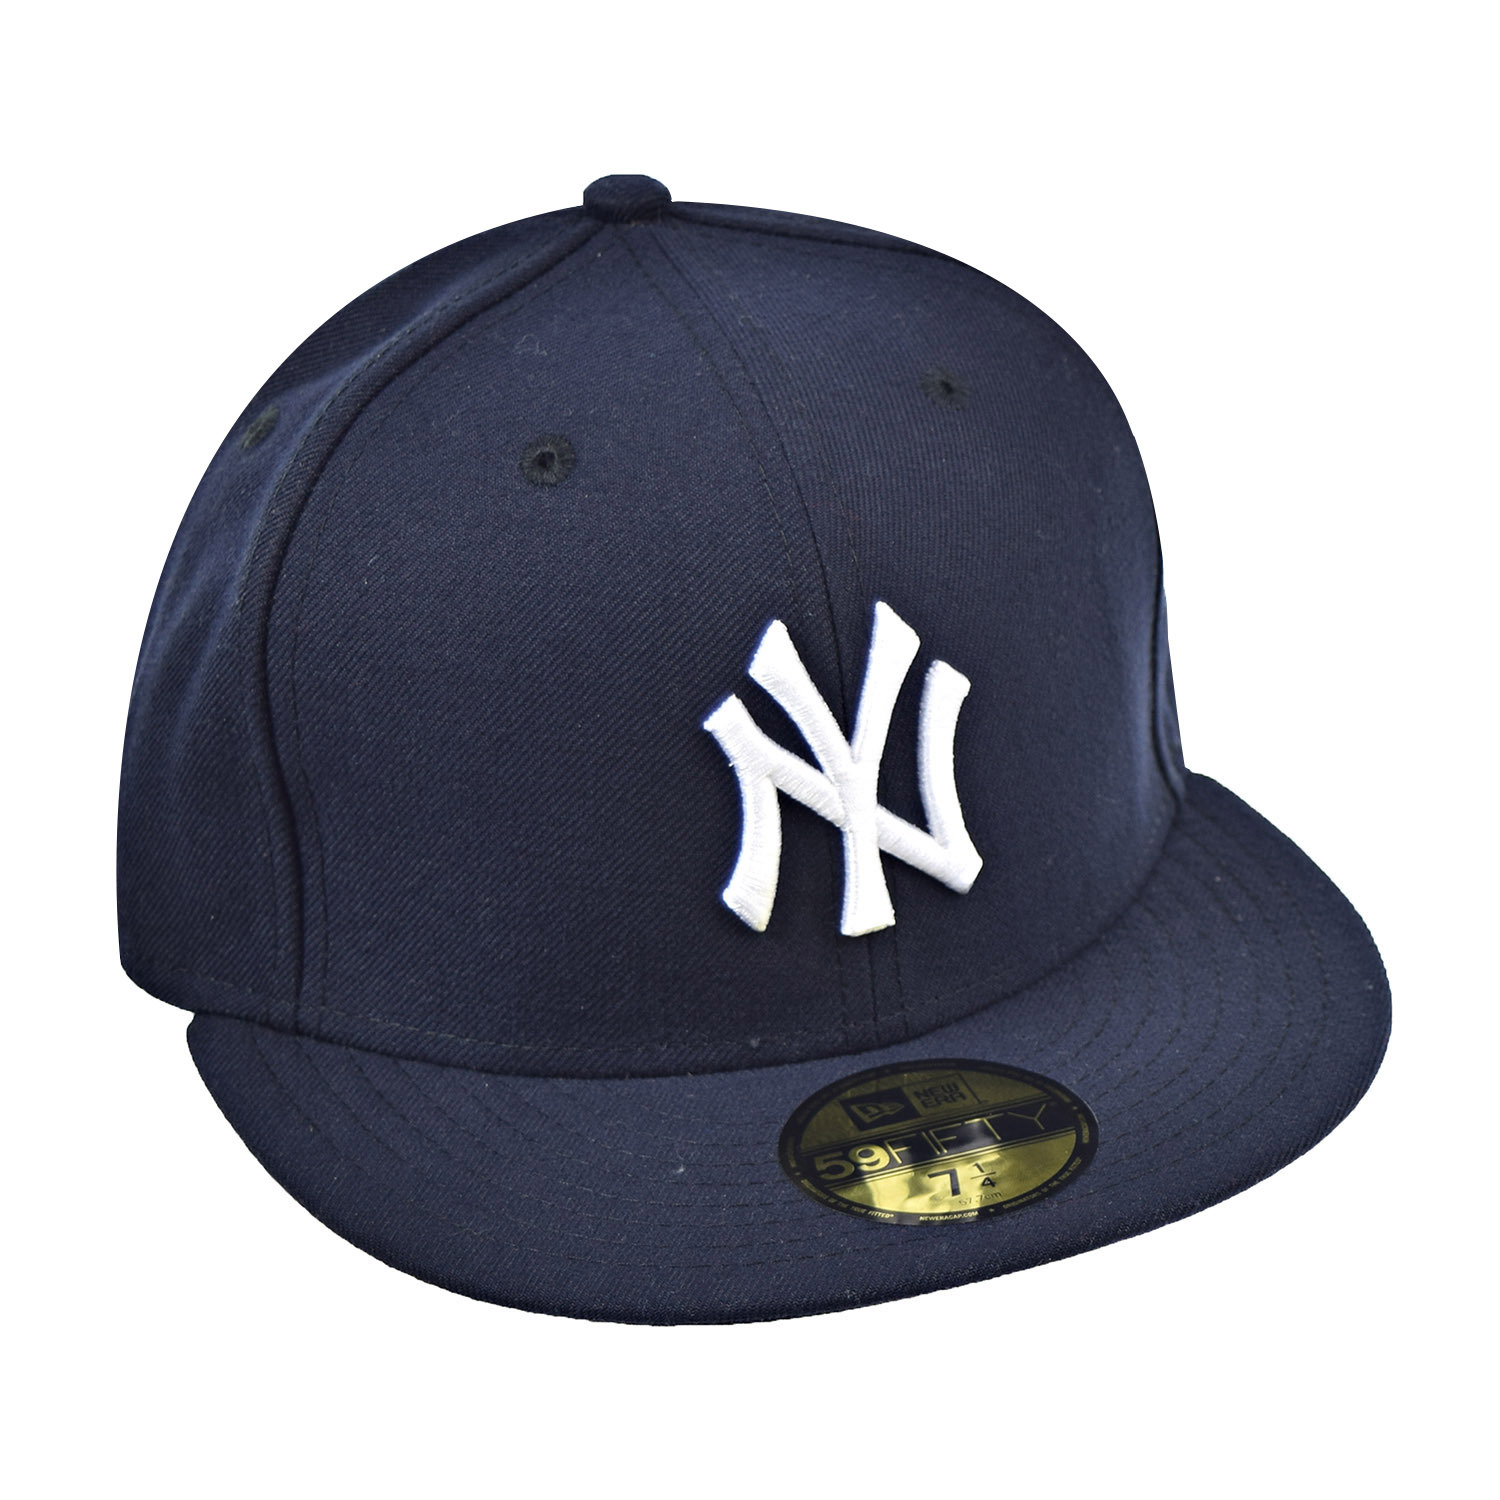 New Era New York Yankees 59Fifty Men's Fitted Hat Cap Navy Blue/White